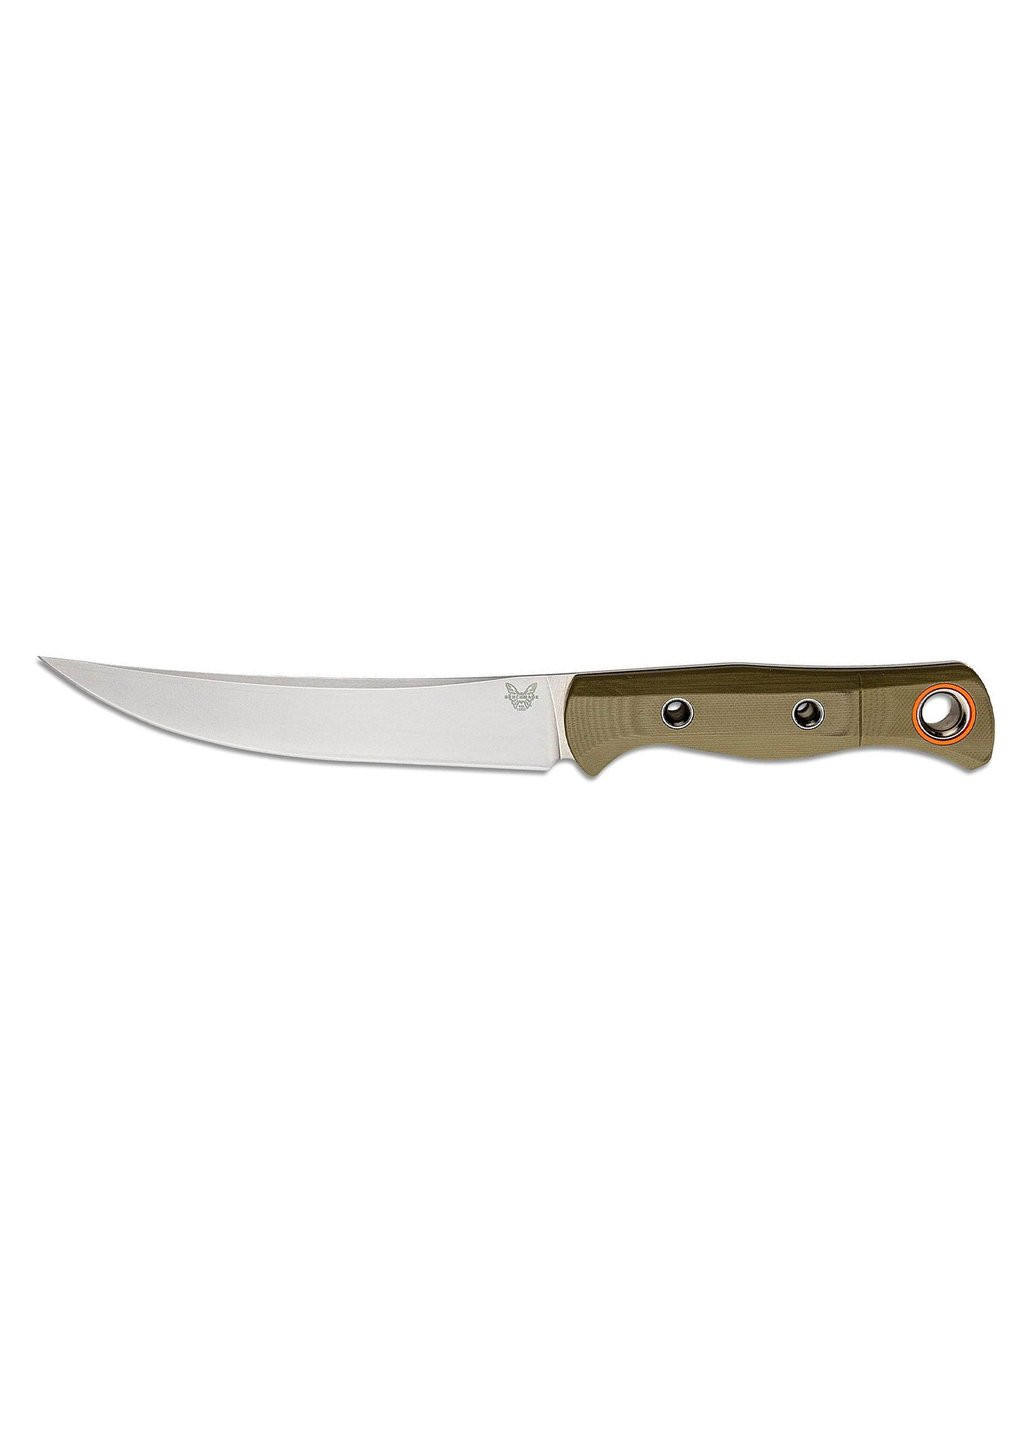 Ніж Meatcrafter Olive G10 (15500-3) Benchmade (257257110)